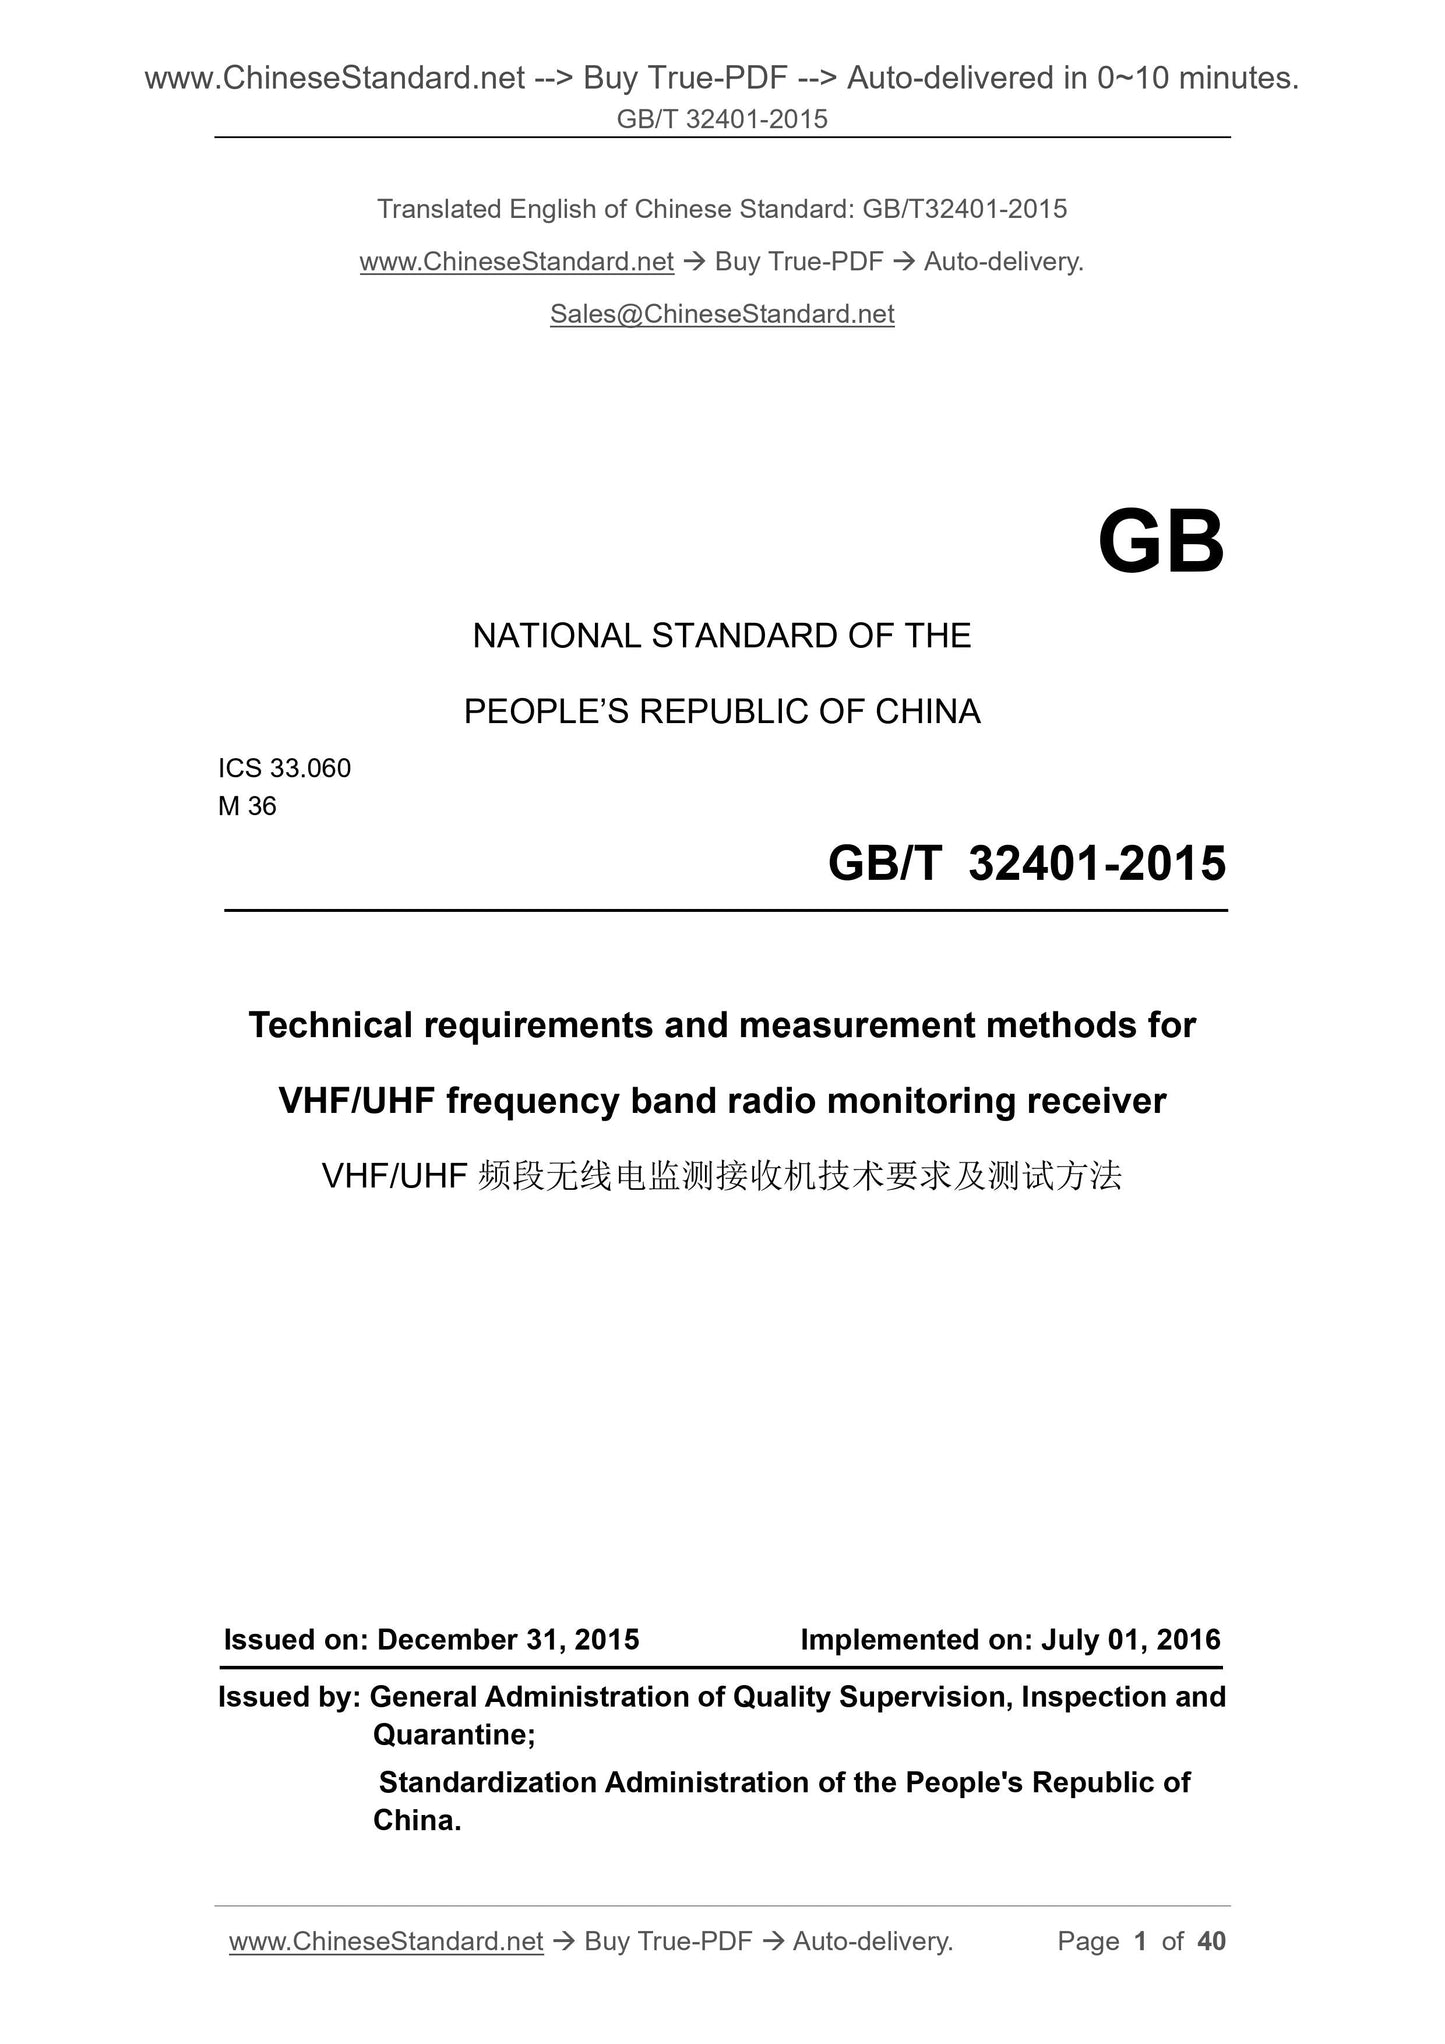 GB/T 32401-2015 Page 1